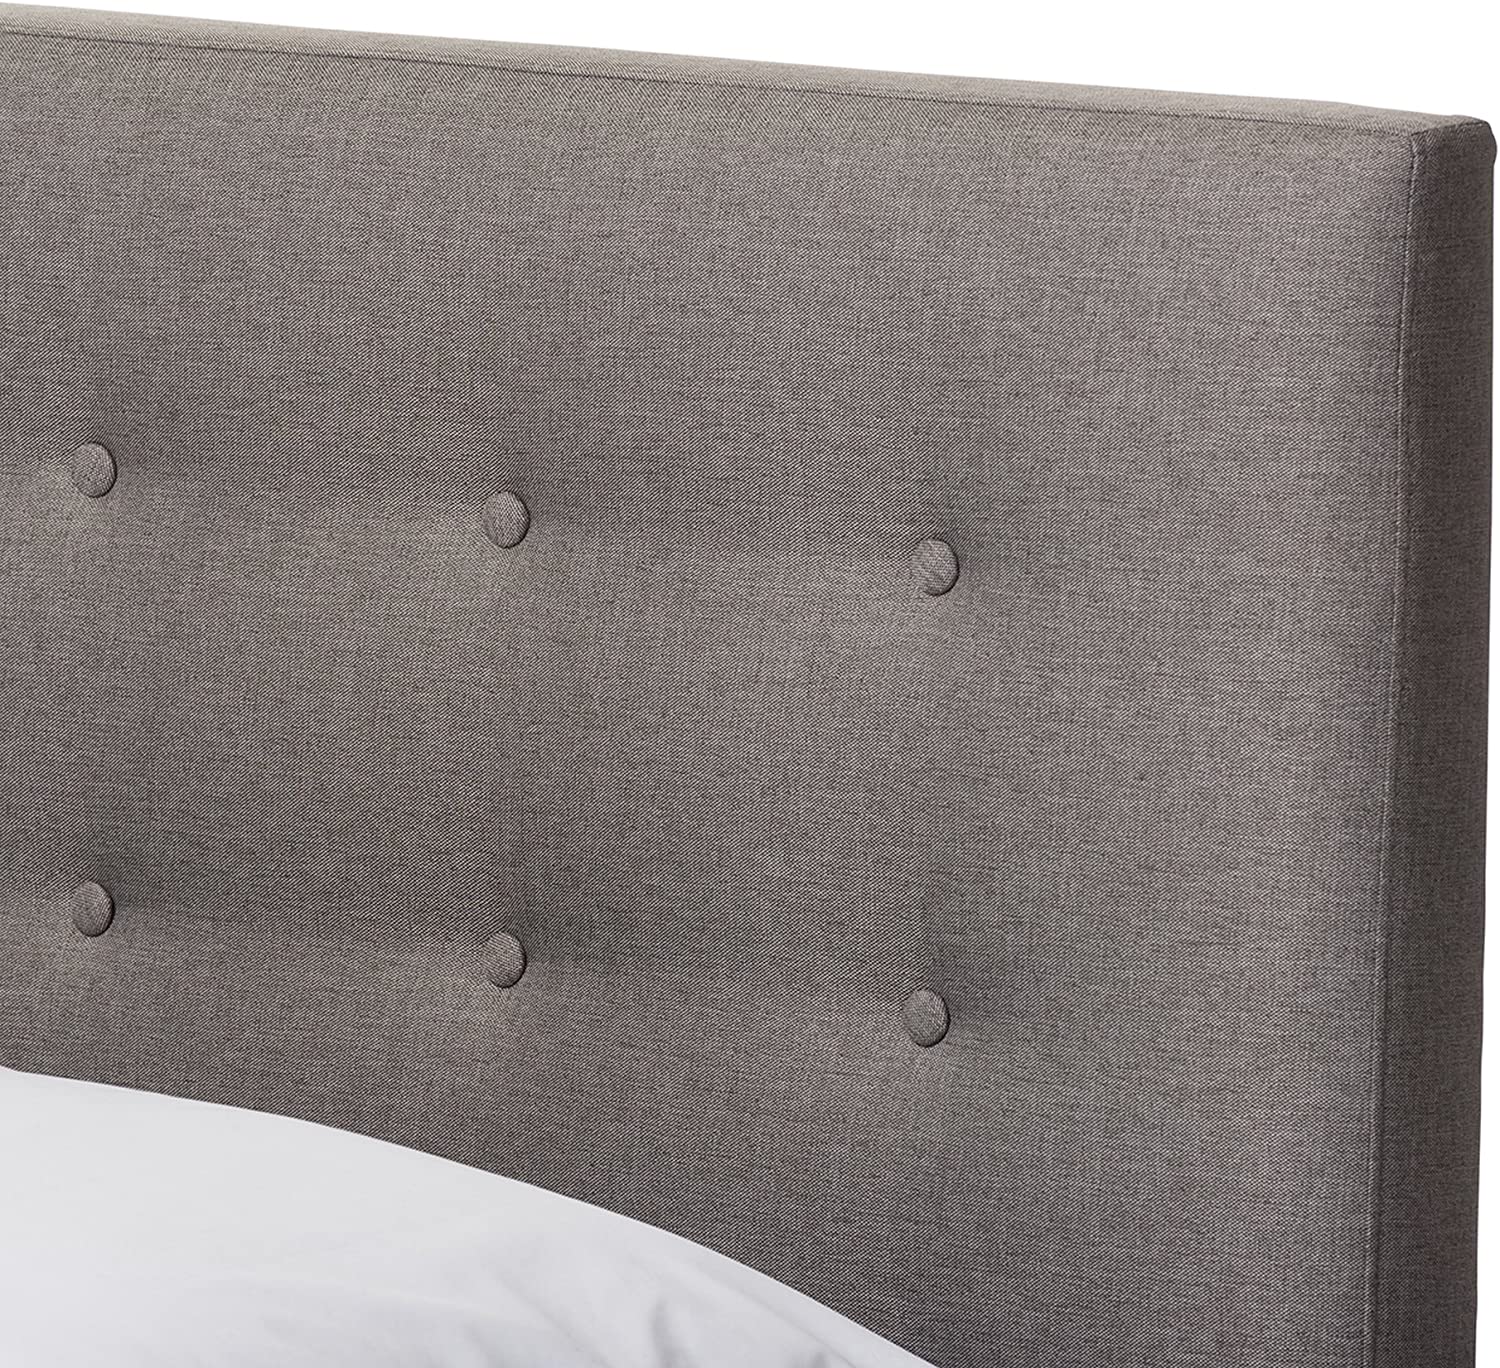 The Alinia full size fabric upholstered platform bed in grey has a beautiful walnut veneer finish that will bring a touch of elegance to your room. The large tapered headboard` with button-tufting design is the focal point to this bed` upholstered in fab